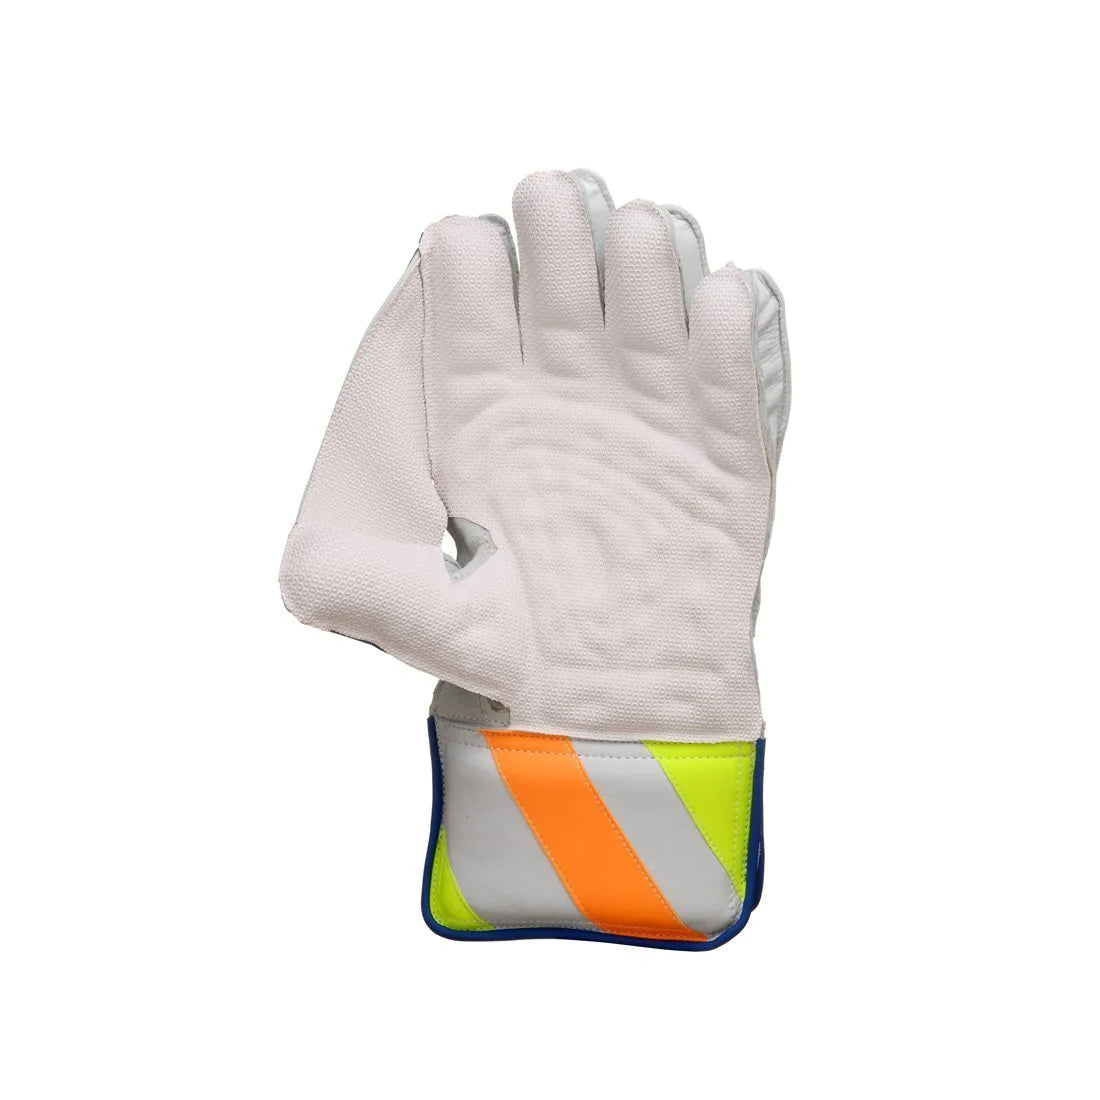 SG R 17 Wicket Keeping Gloves (Multi-Color)